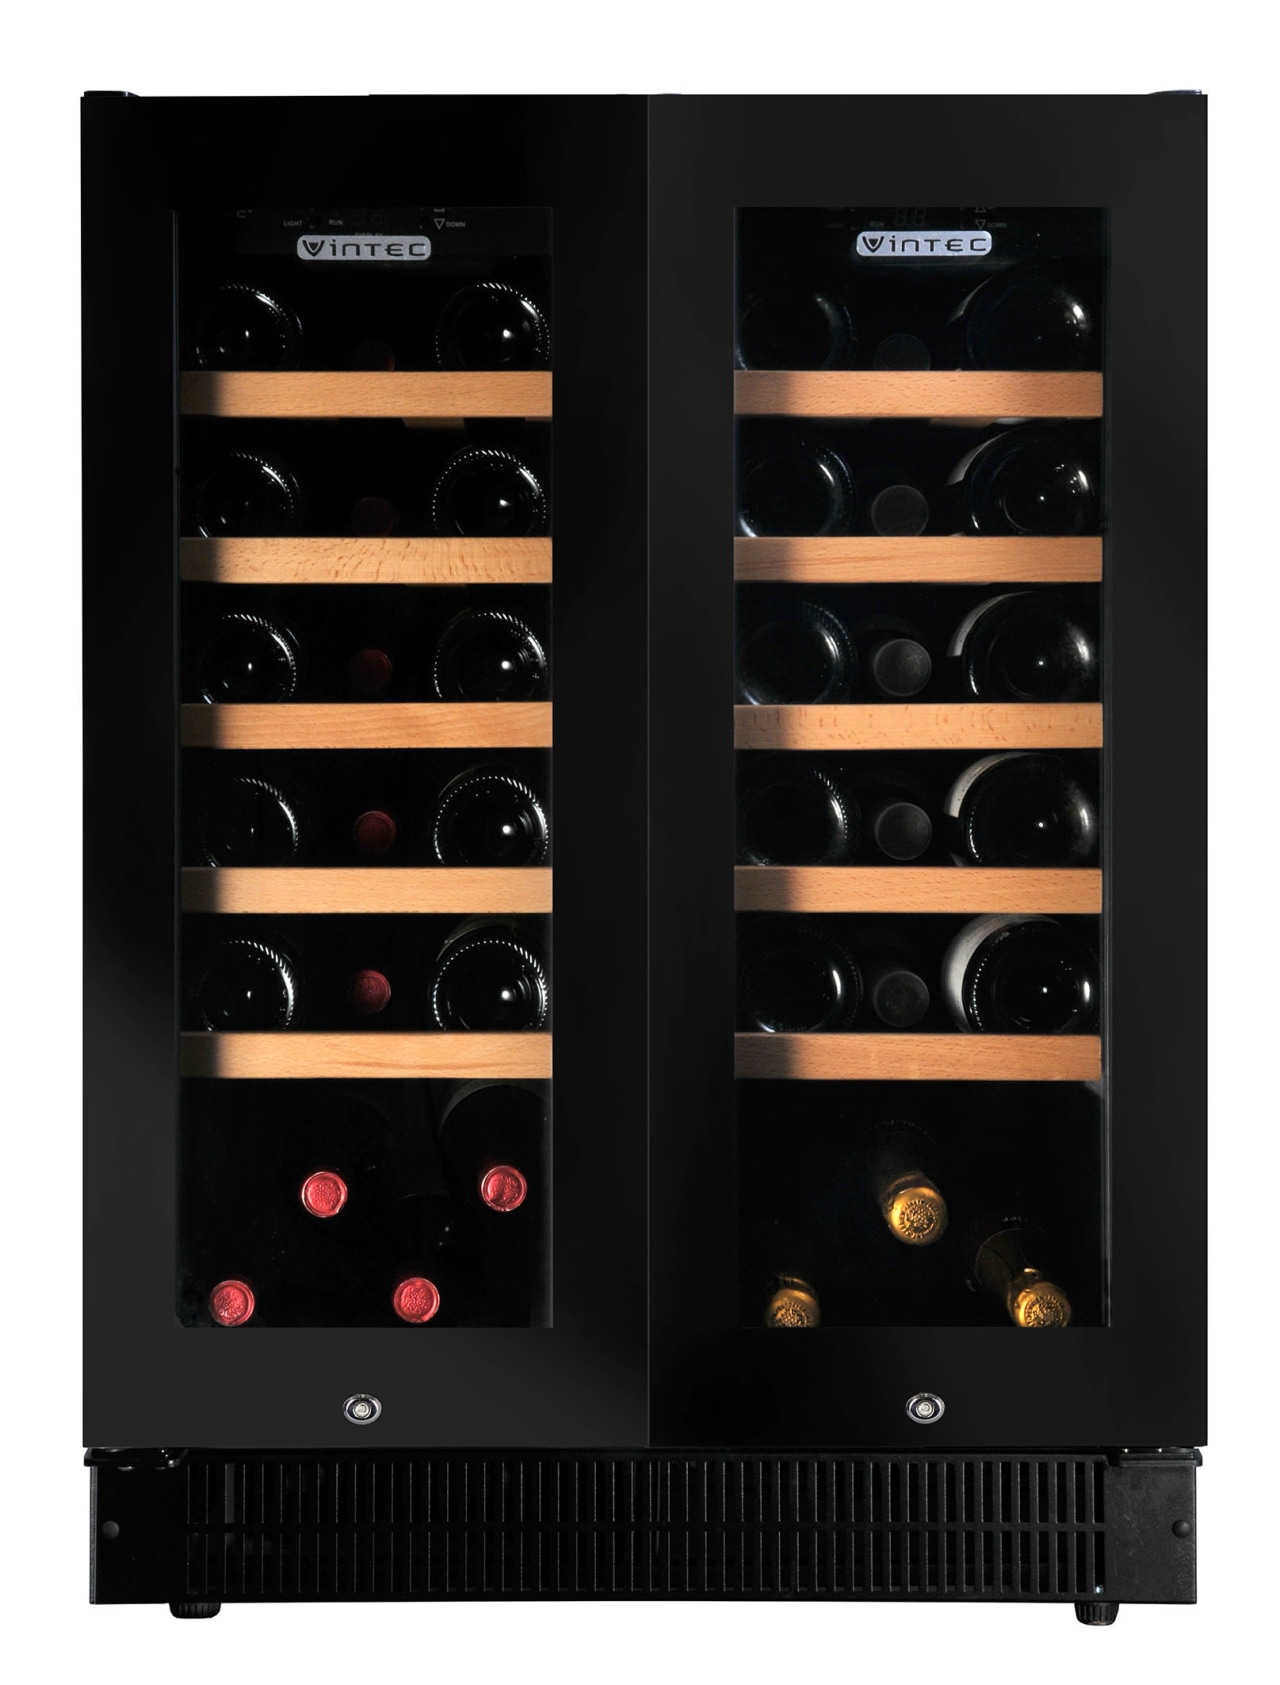 A collection of fine wine shouldnt be relegated home appliance, product, black